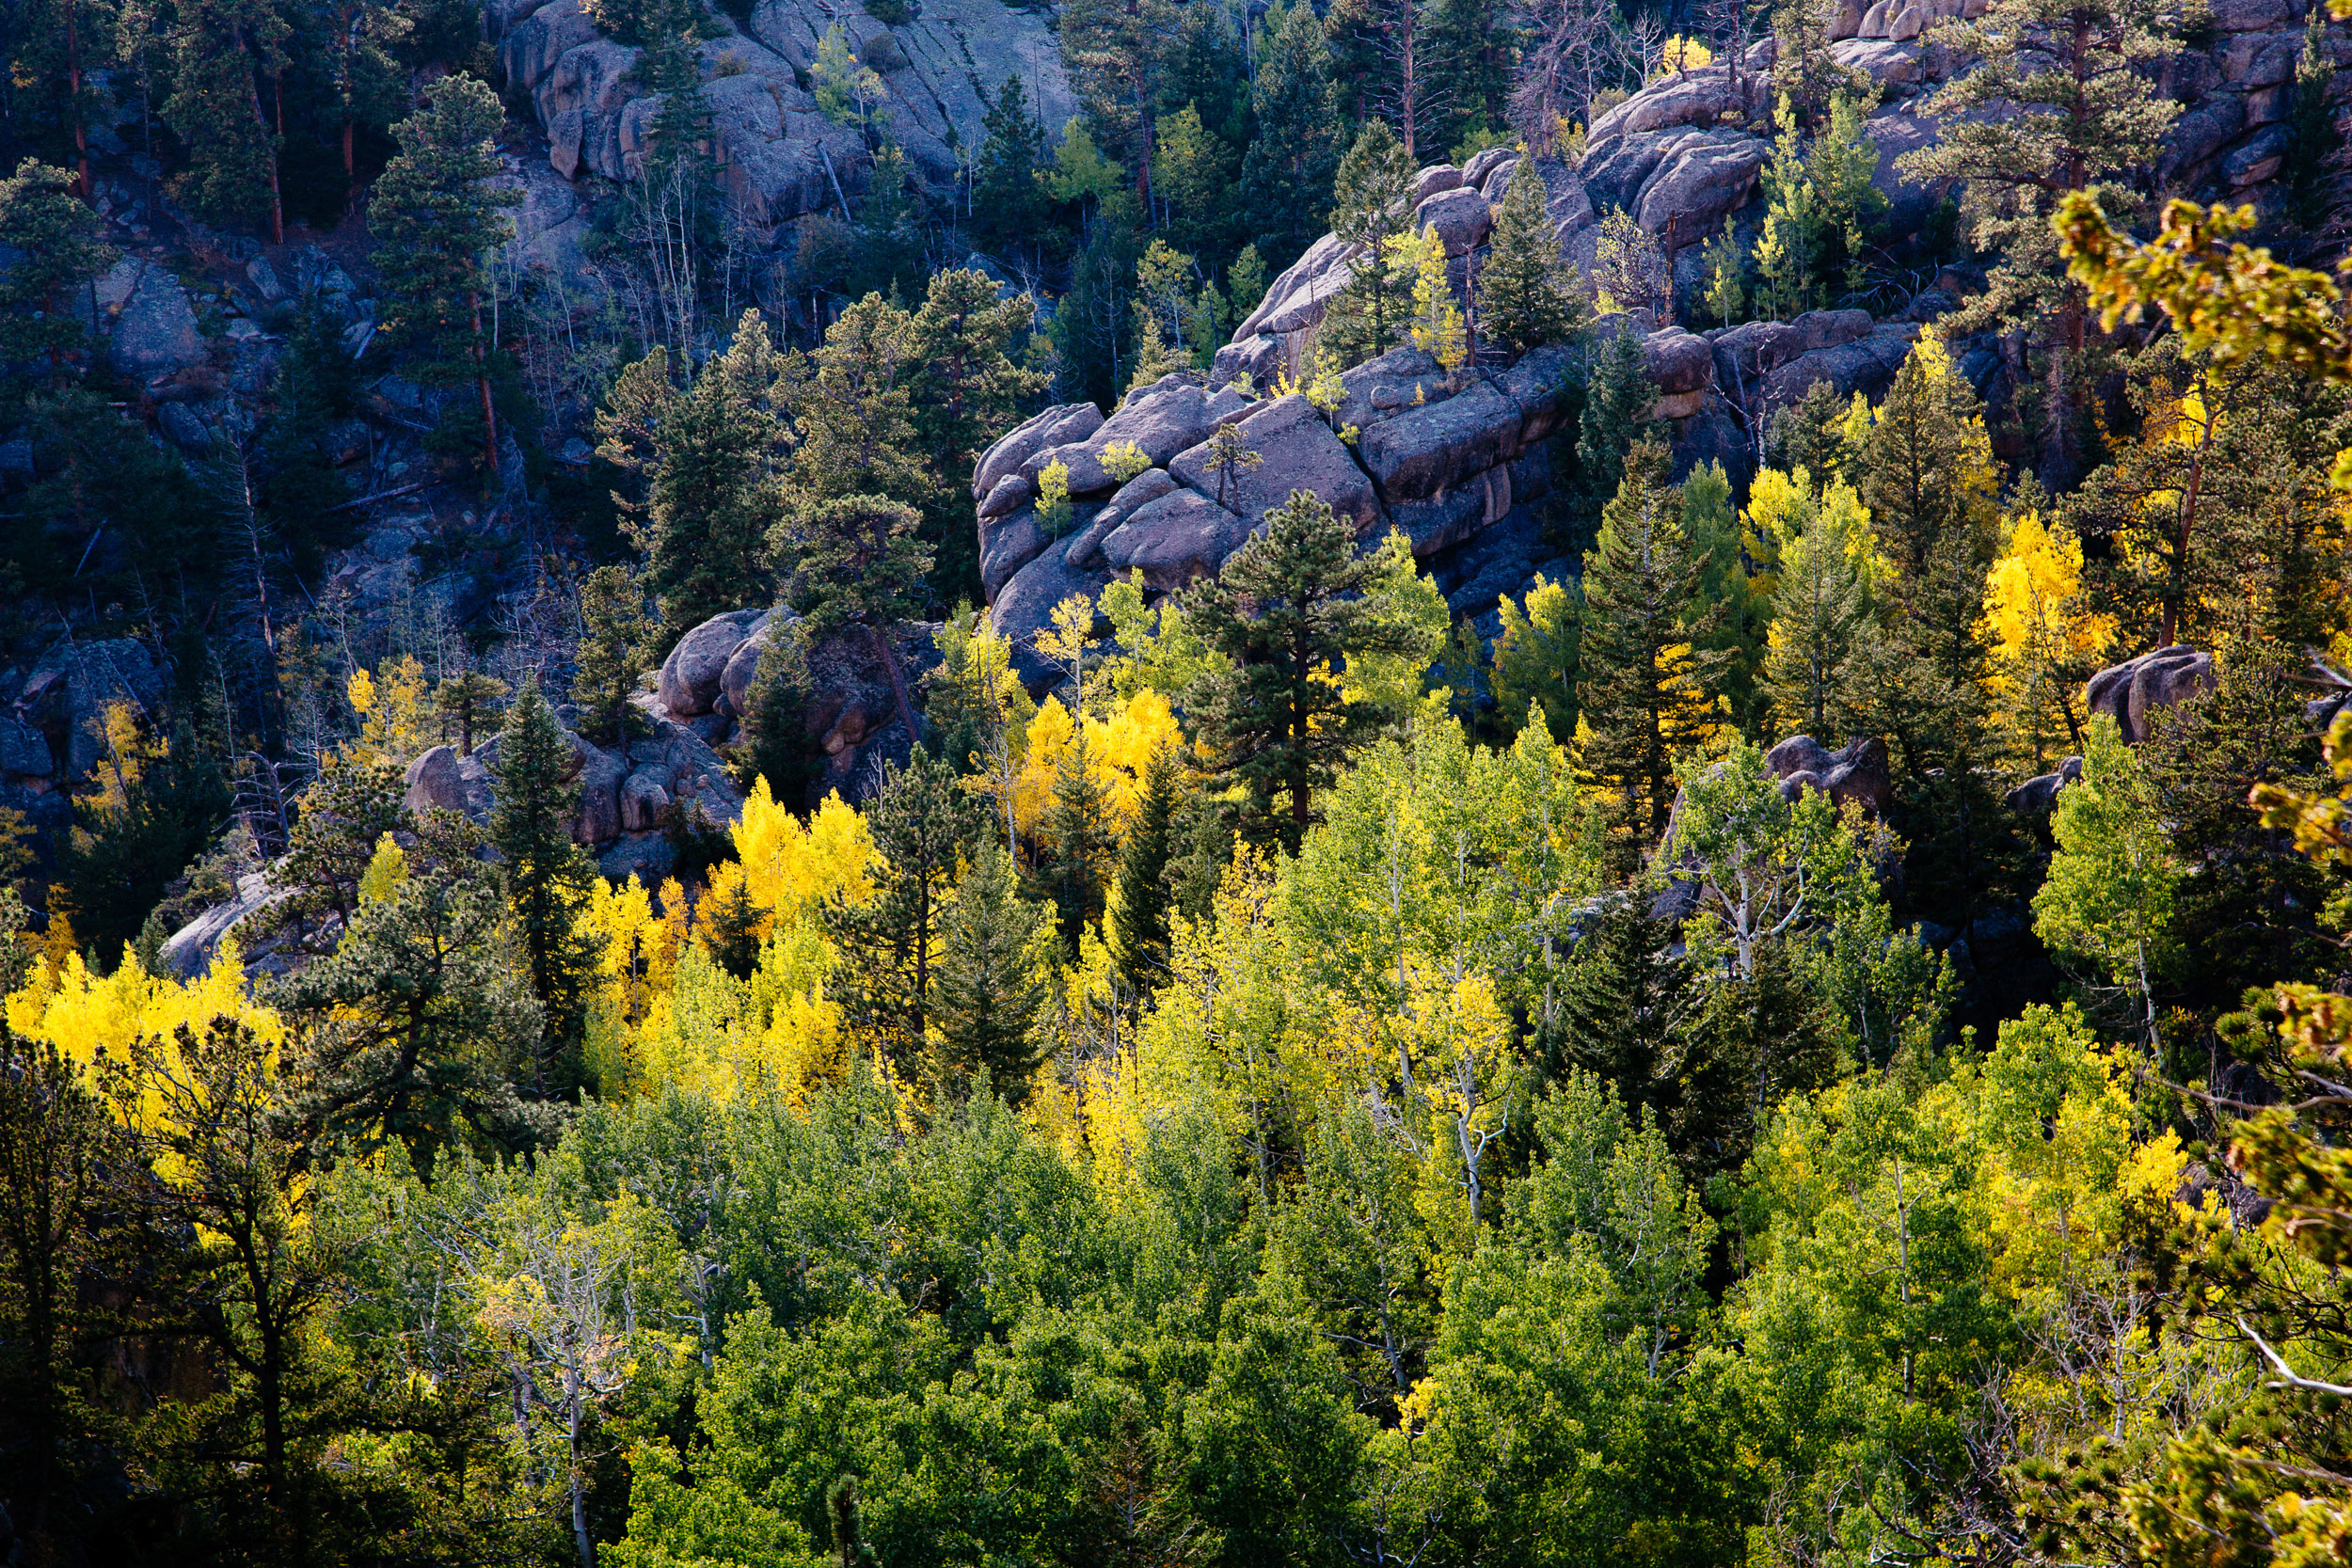 Fall aspens accentuate the landscape amid evergreens and boulders